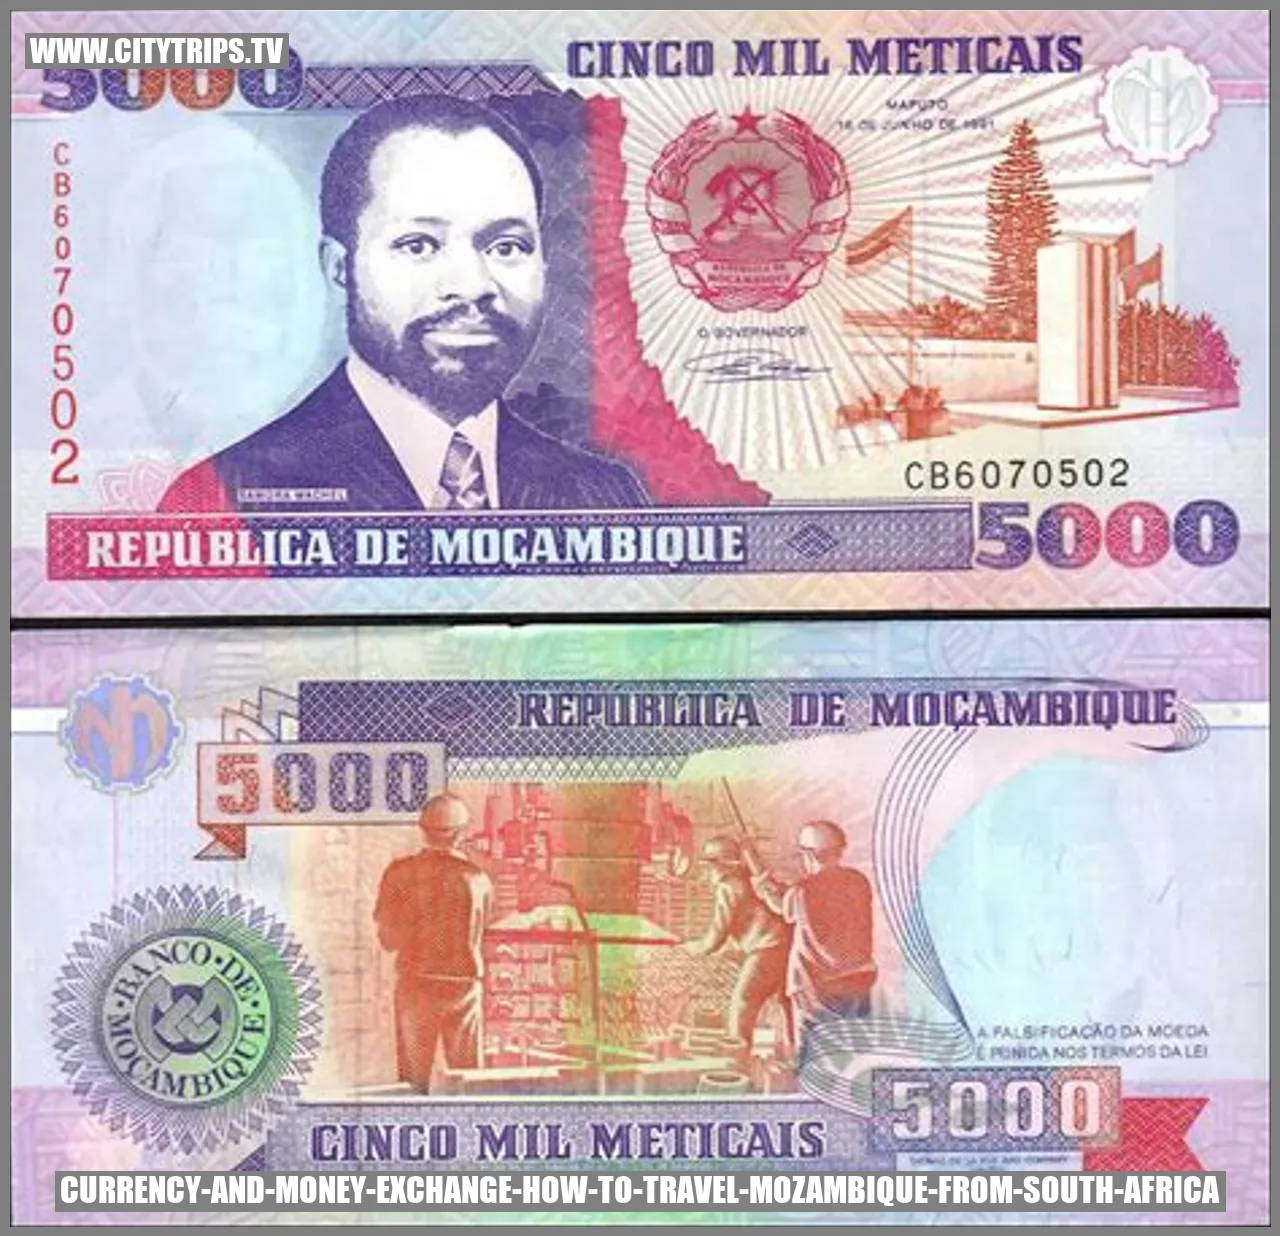 Currency and Money Exchange in Mozambique